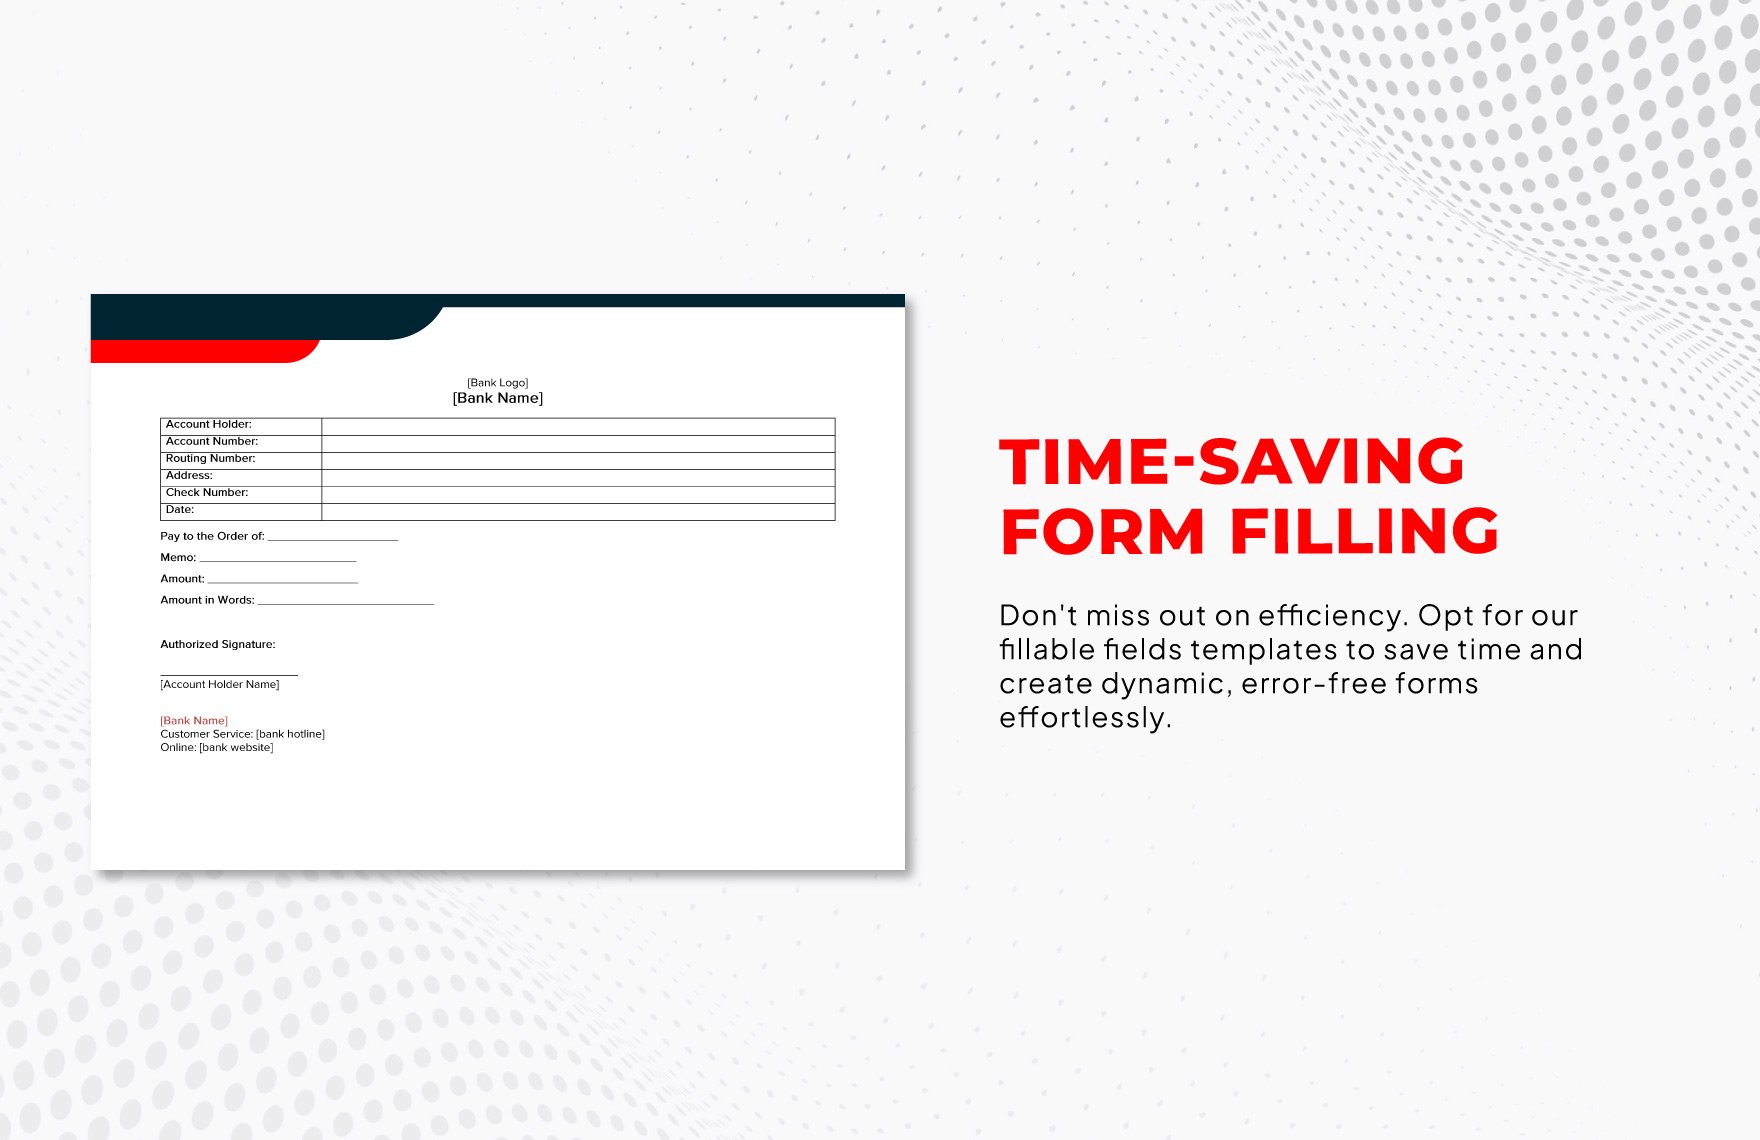 Fillable Blank Check Template